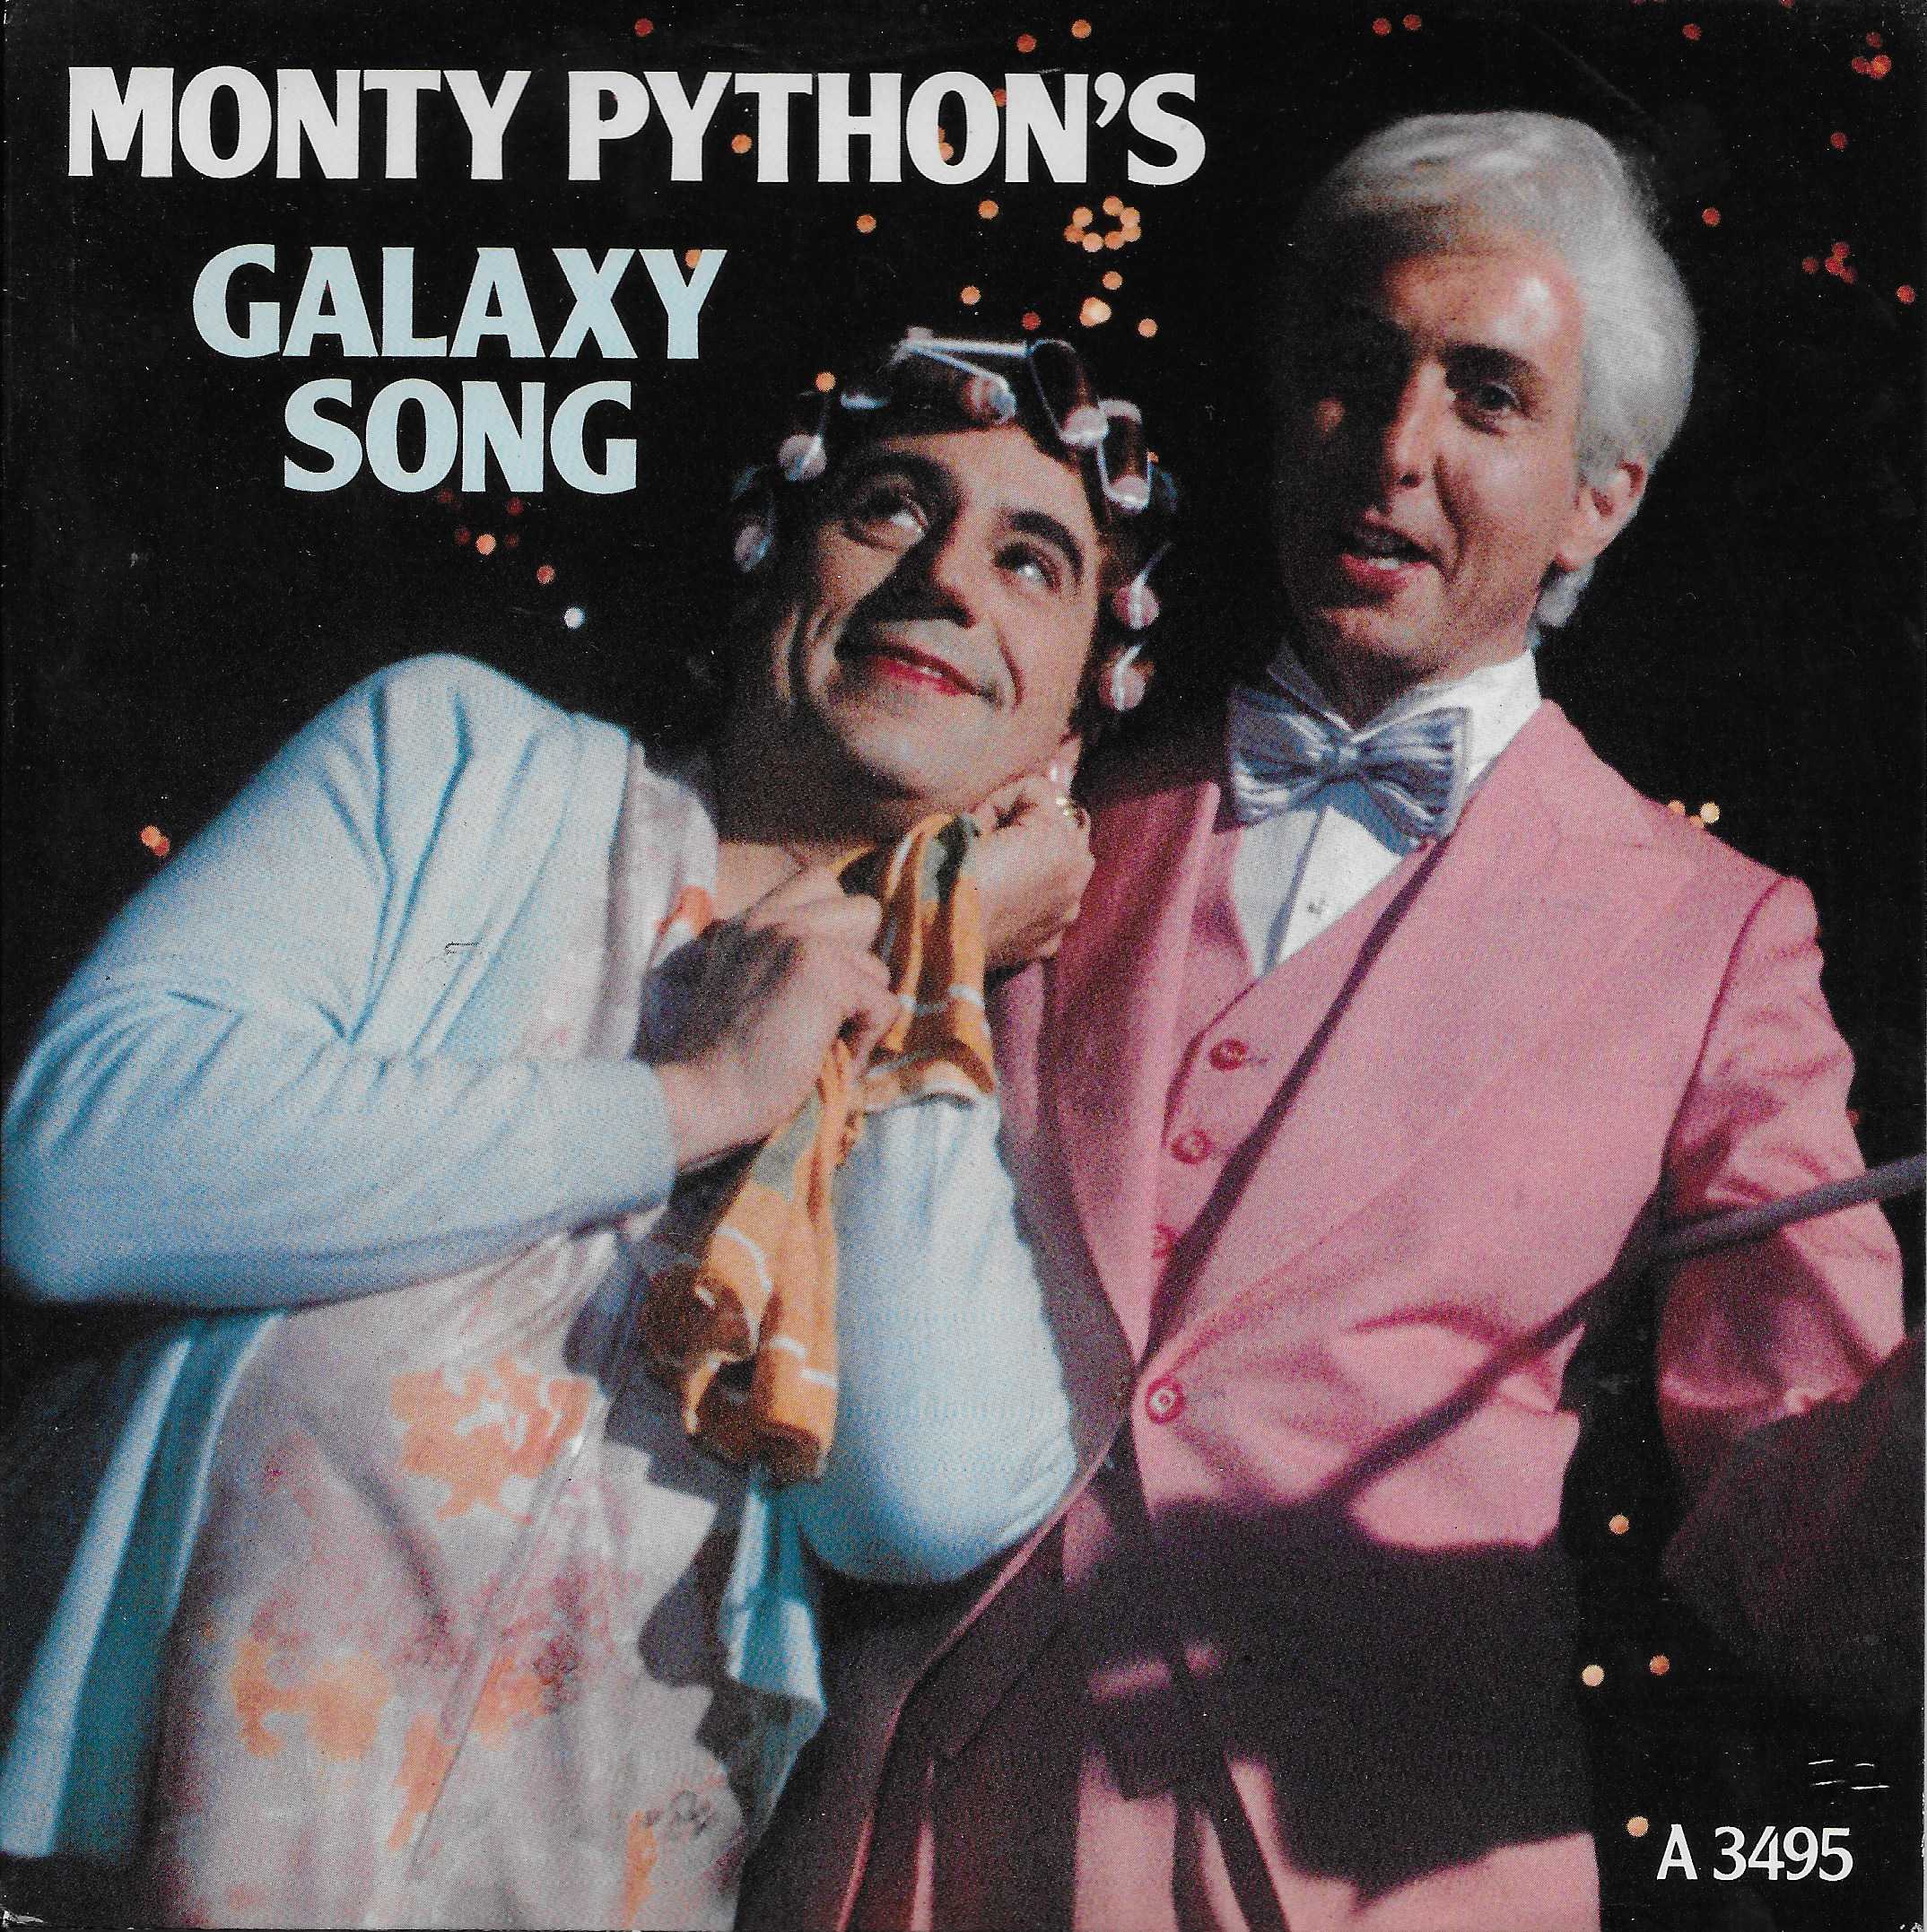 Picture of A 3495 Galaxy song (Monty Python's flying circus) - Promotional record by artist Monty Python from the BBC singles - Records and Tapes library